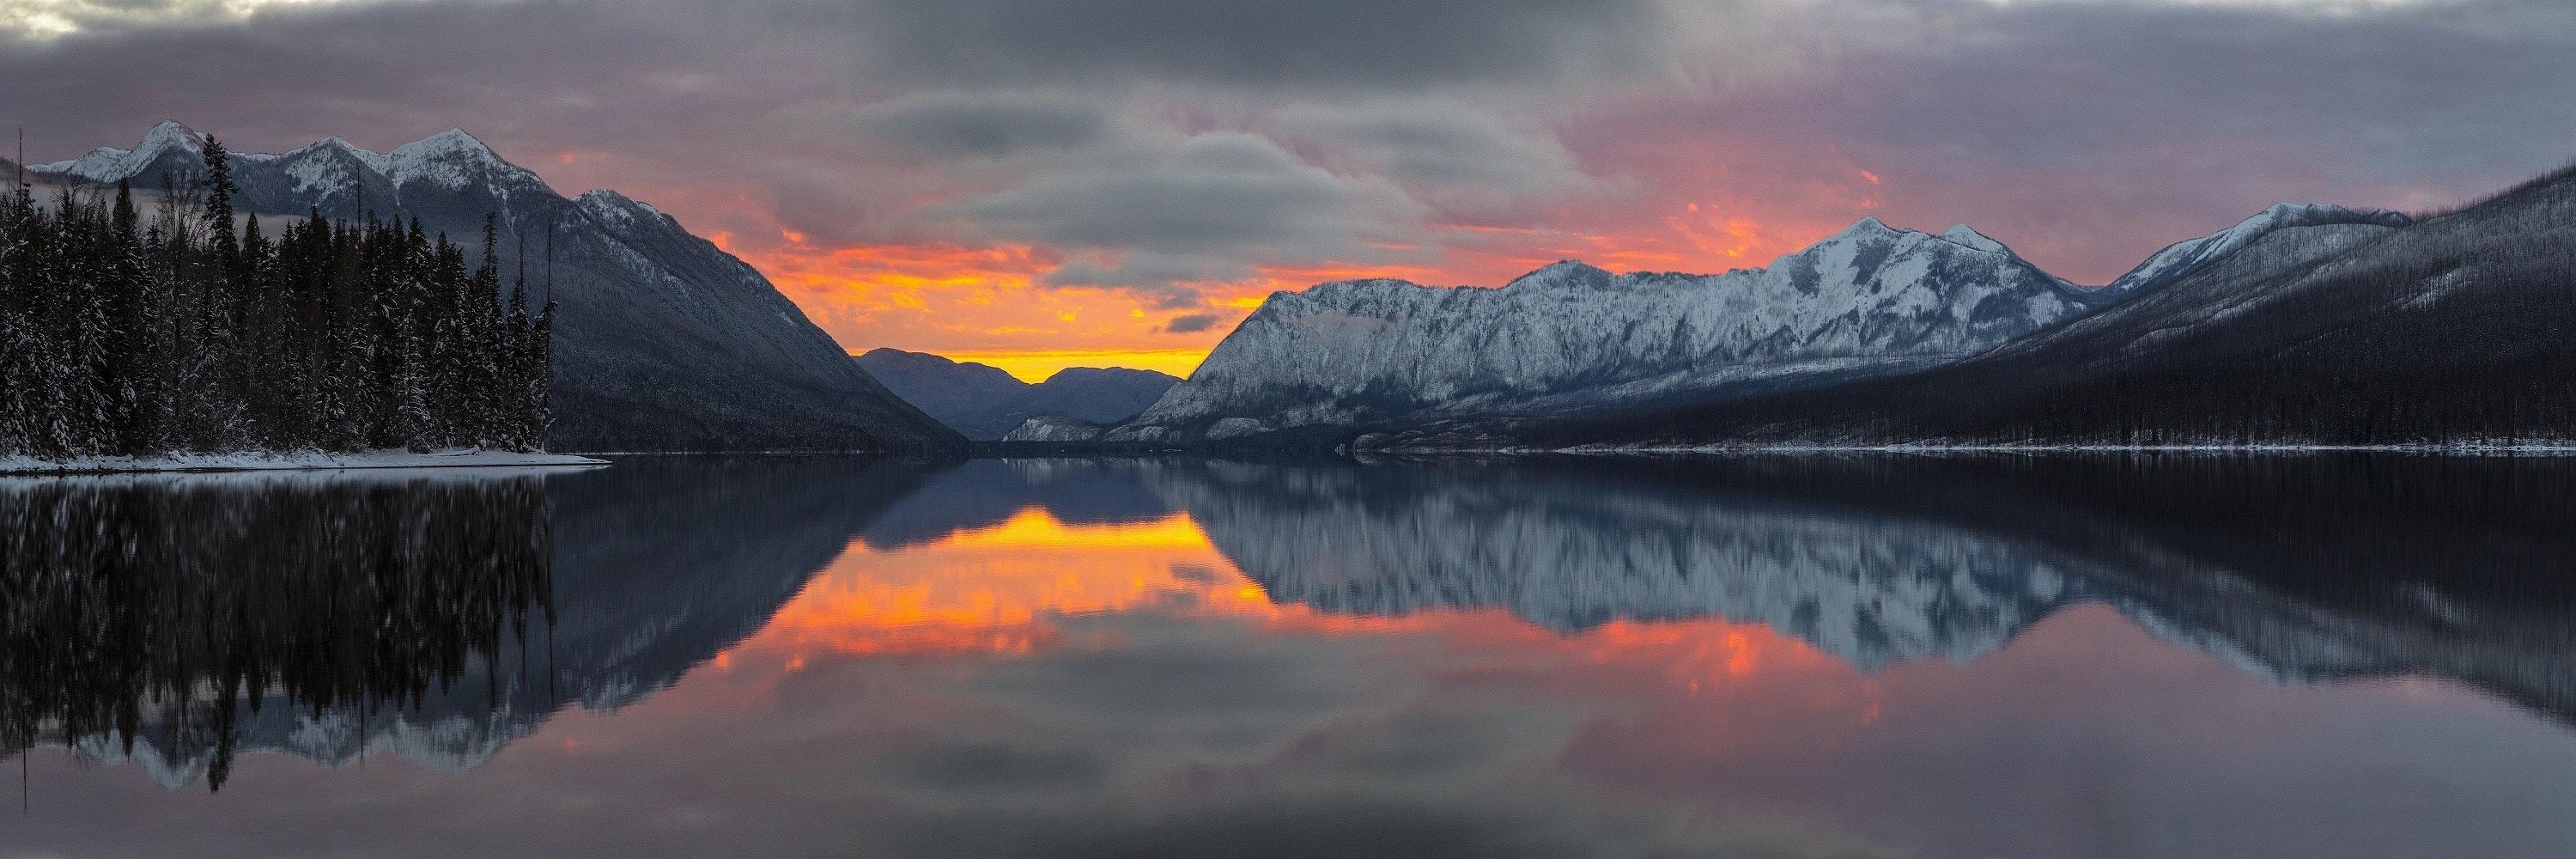 Reflection of Mountains in Lake during Sunset · Free